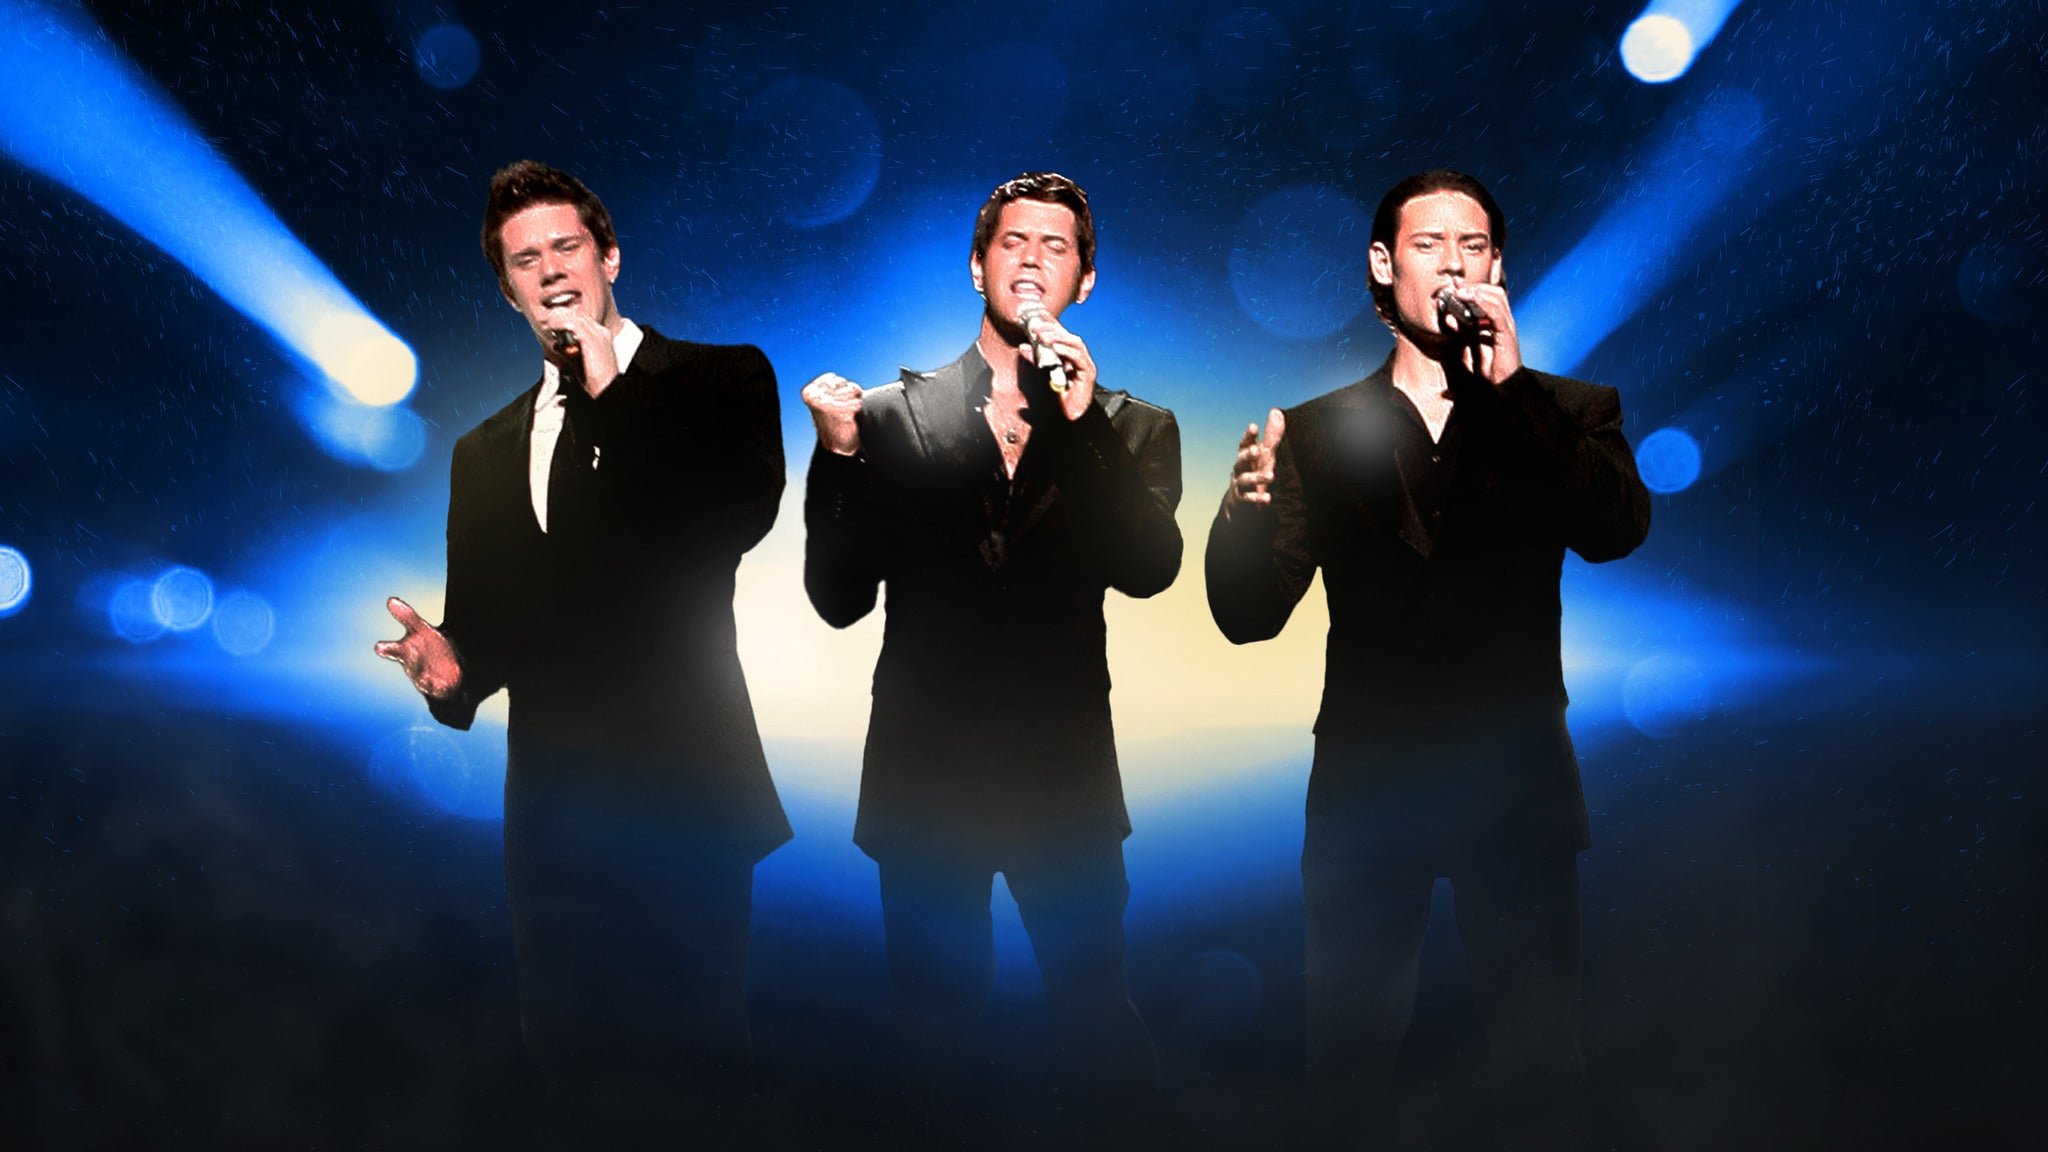 Il Divo: A New Day Holiday Tour